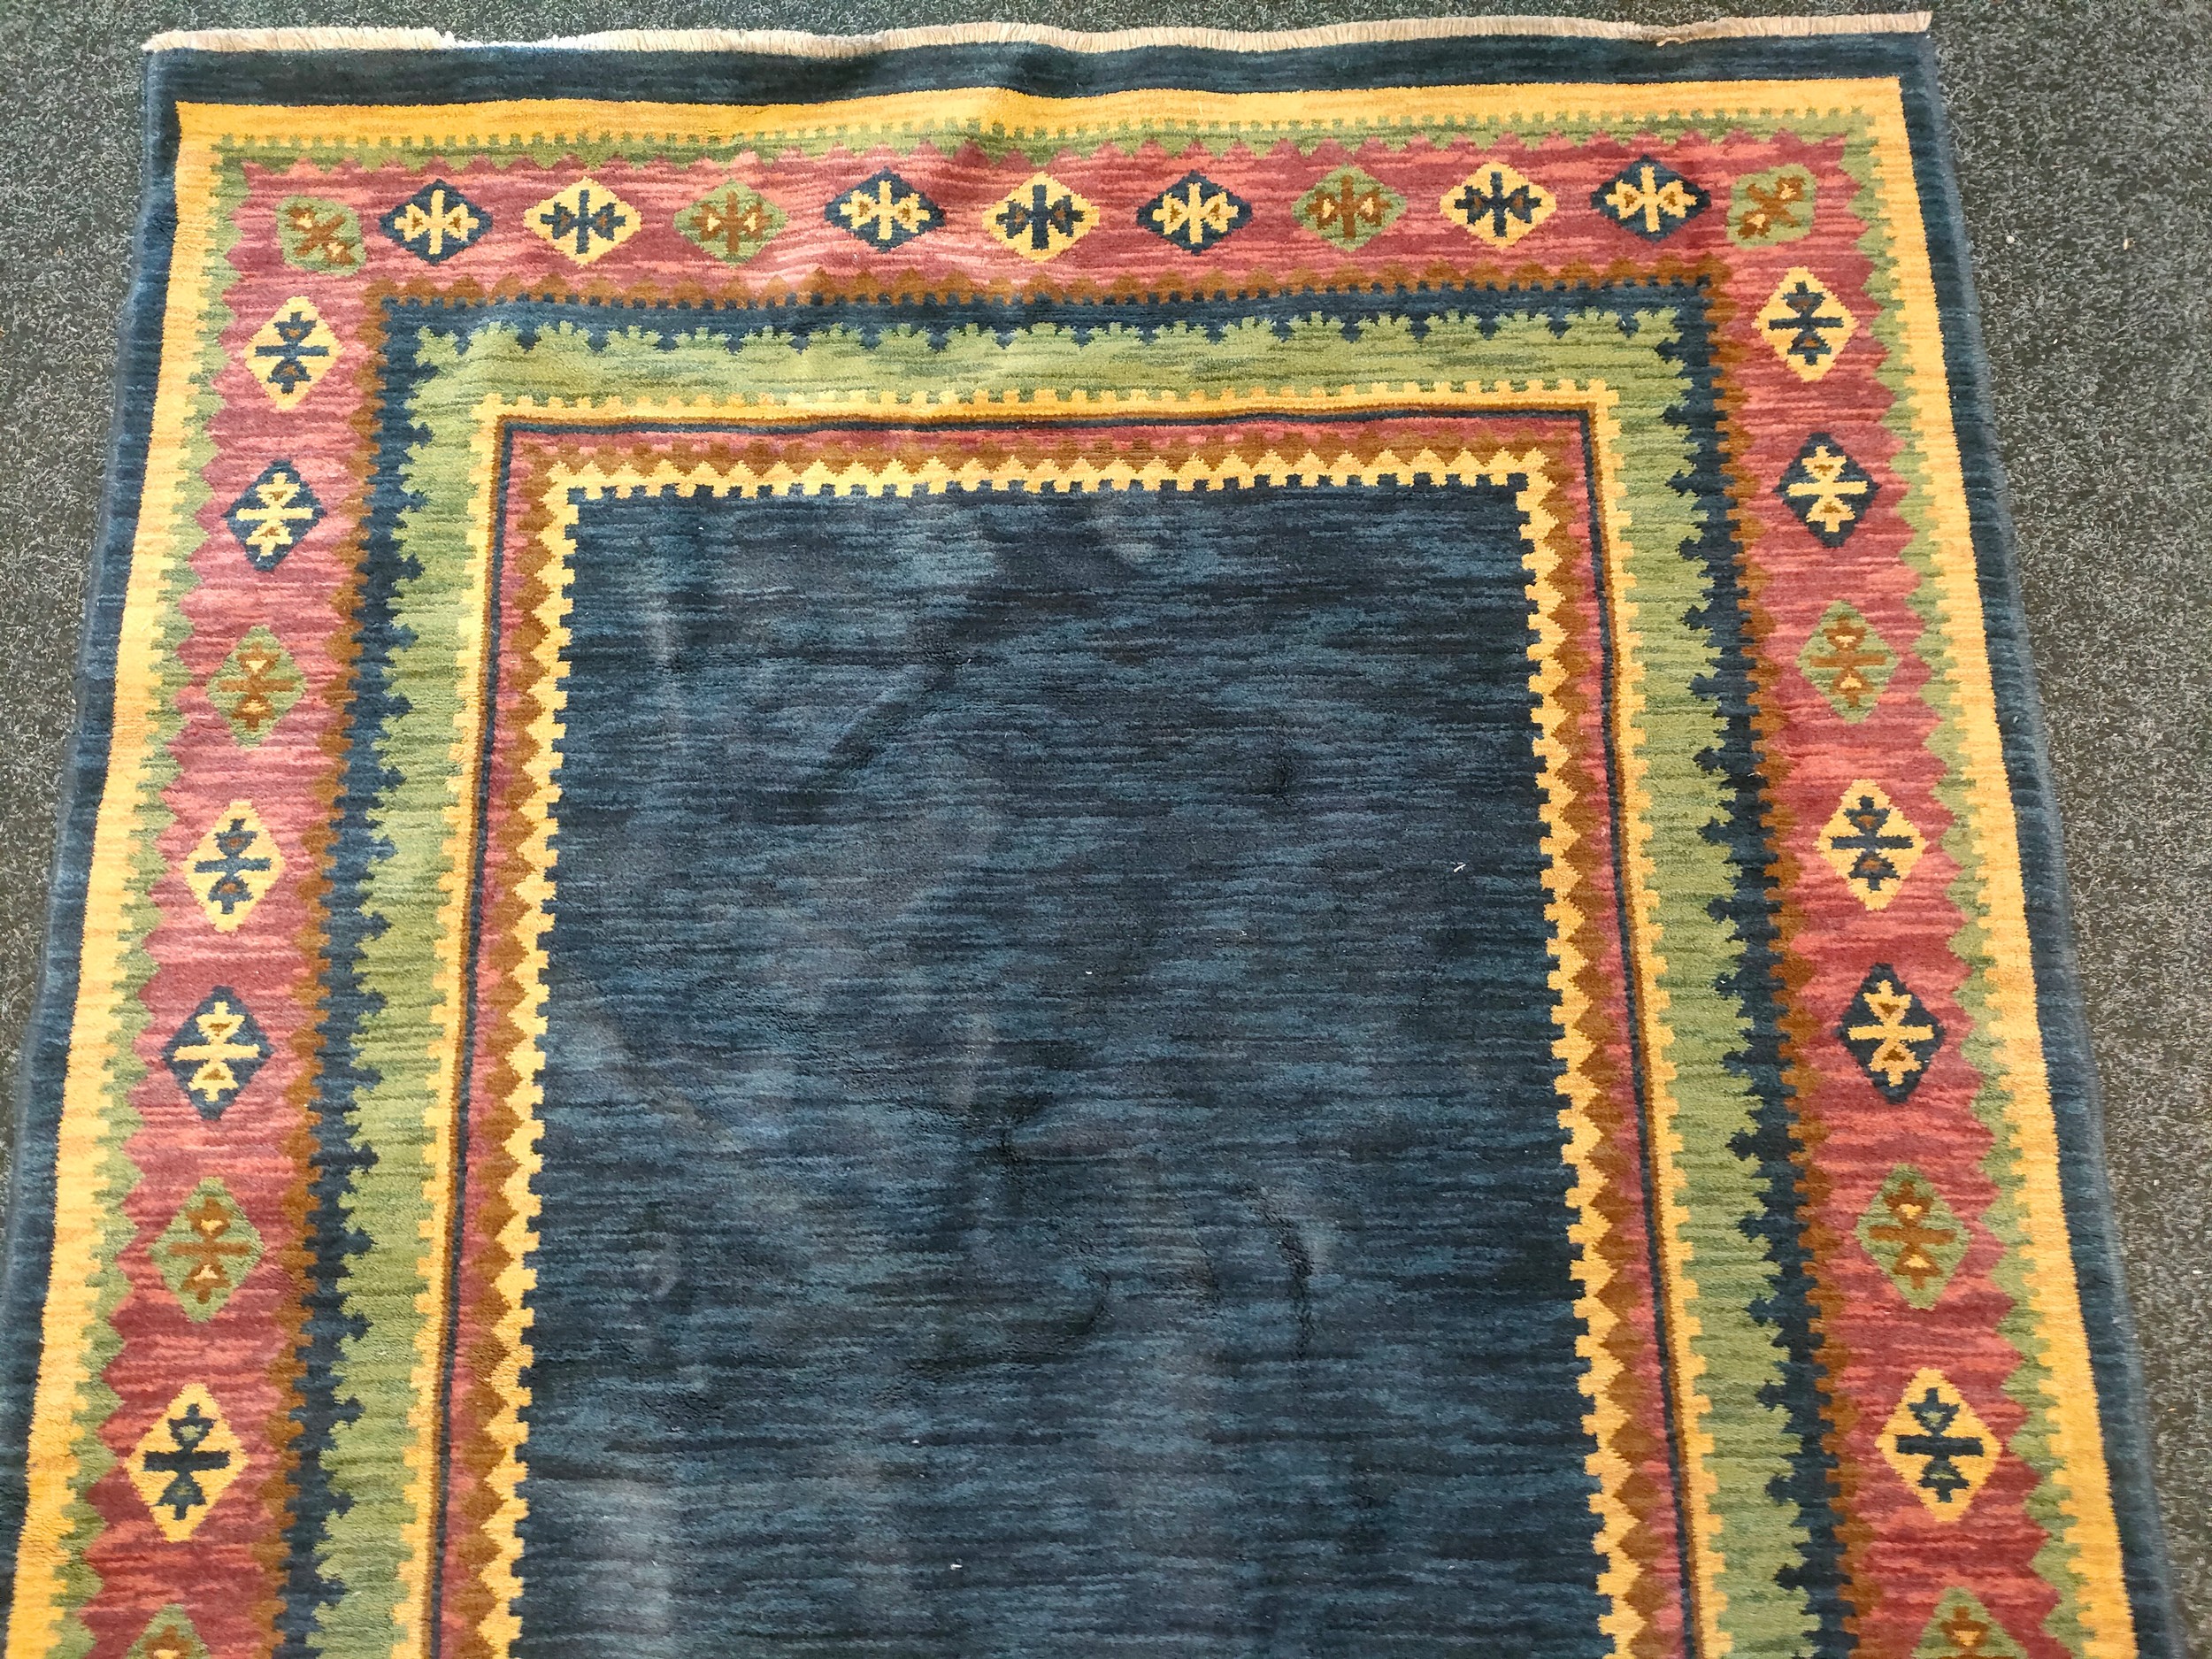 A Hand Knotted Gabbeh Turkish Rug set with a blue centre & Turkish border pattern [233.5x135cm] - Image 3 of 4